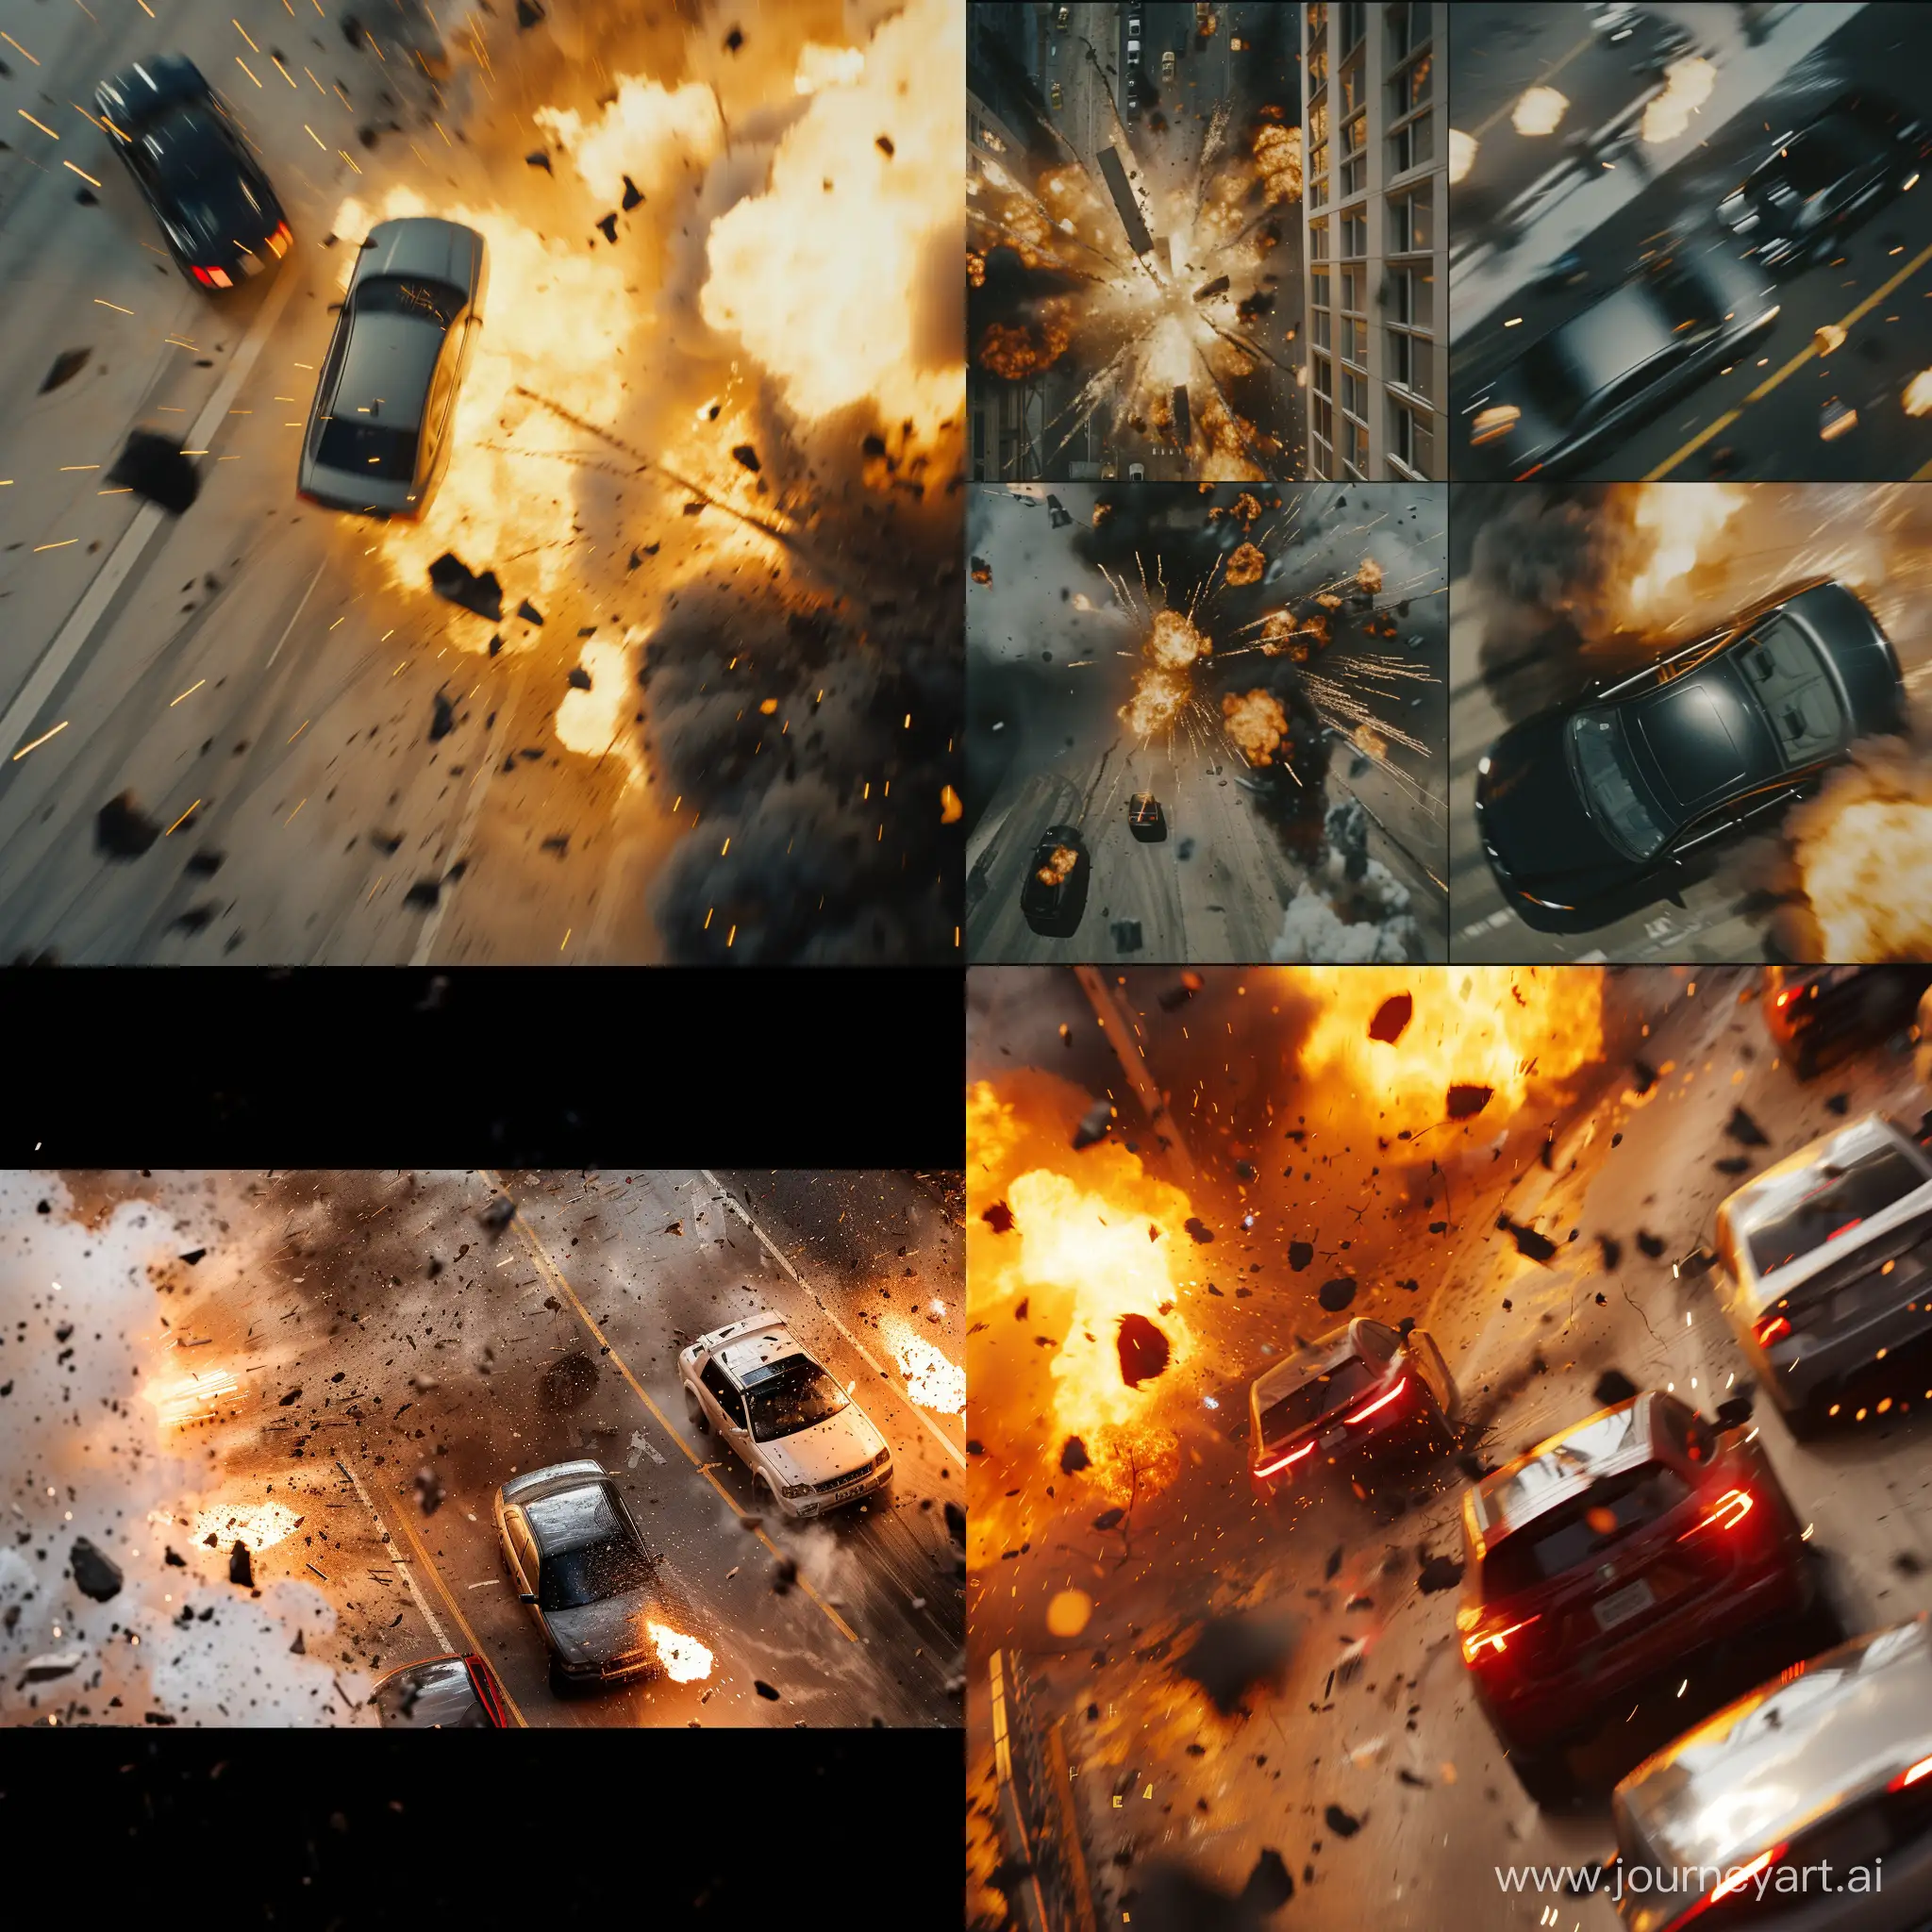 (Quick shots of intense action scenes: car chases, explosions, and gunfire.)  0:04 - [Narrator] "In a world of deception and danger...where trust can lead to betrayal..."